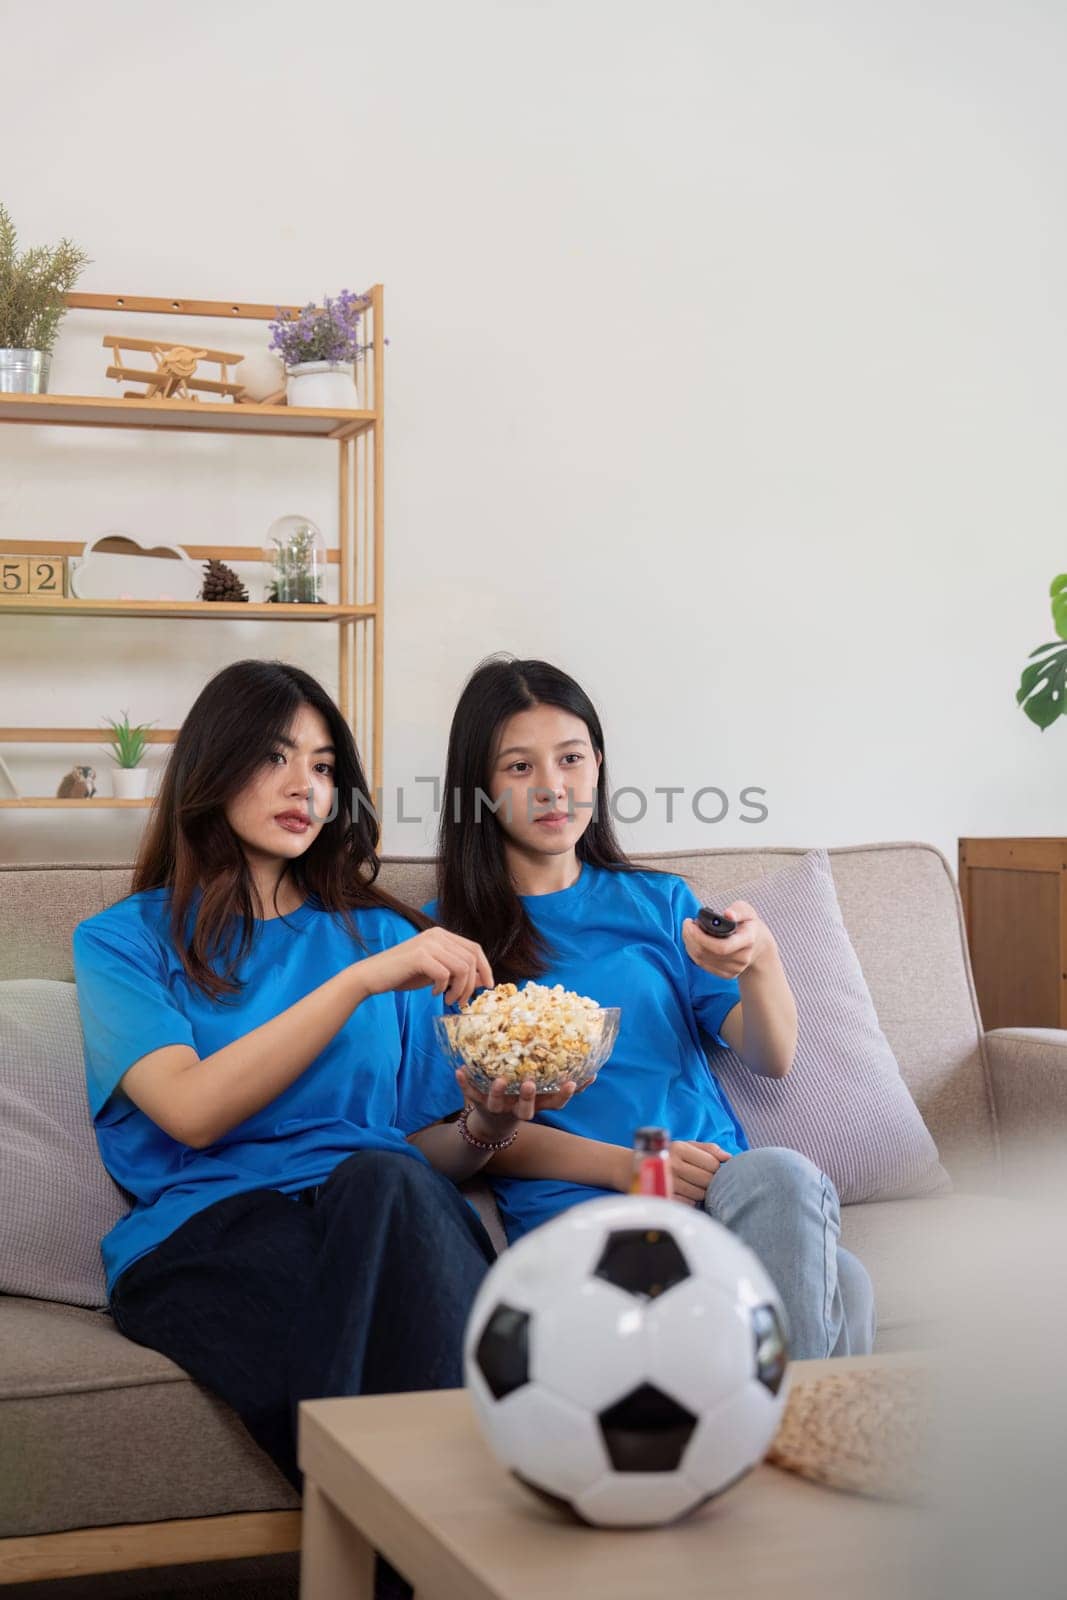 Friends watching a football game at home. Two women enjoying a sports match on TV with popcorn and snacks by nateemee